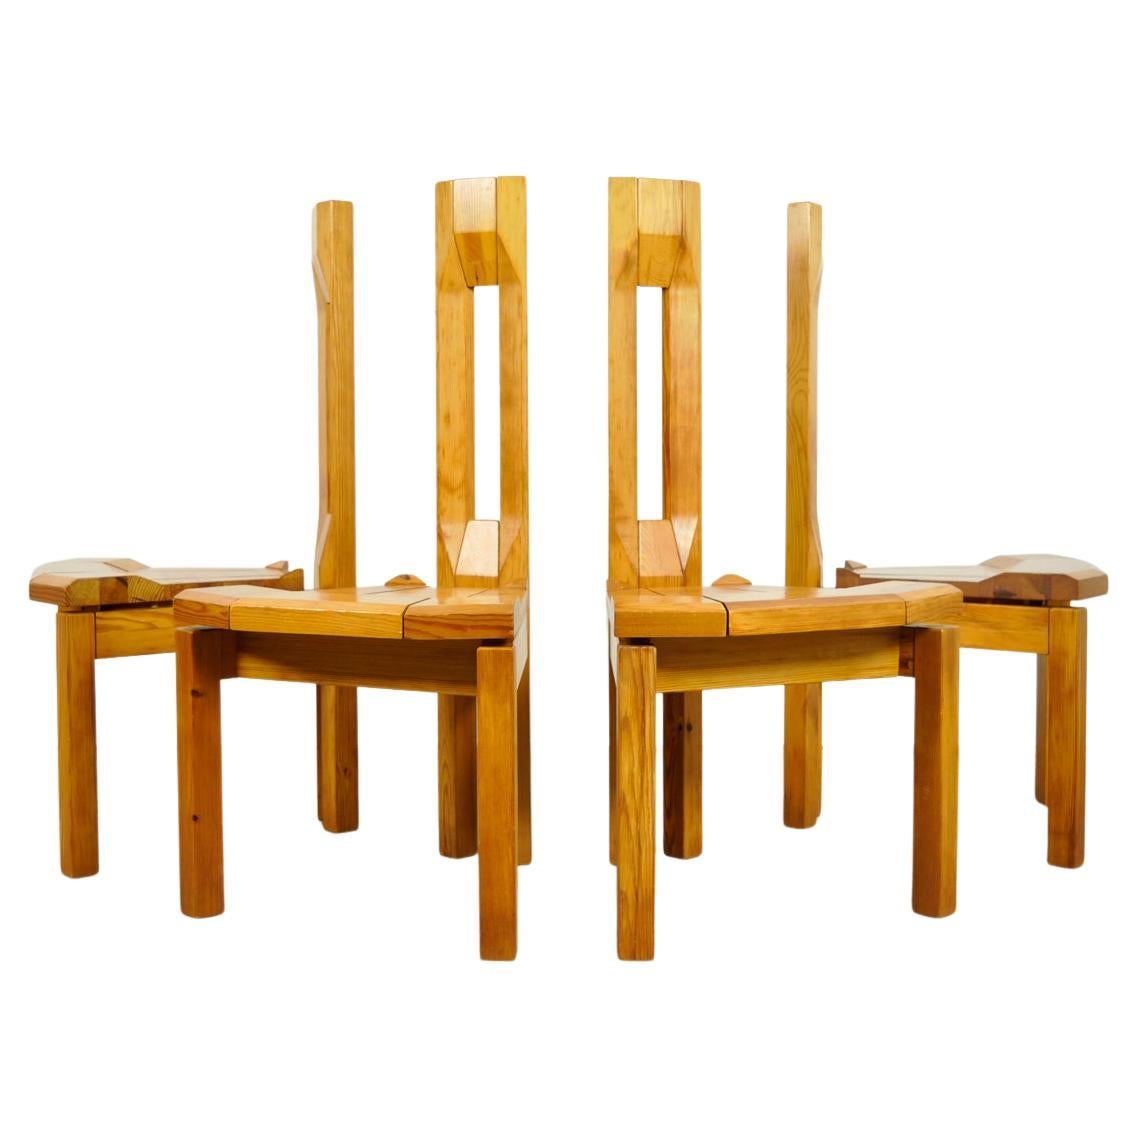 Pine Dining Chairs “Rantasipi” by Arnold Lerber for Laukaan Puu, Finland, 1970s For Sale